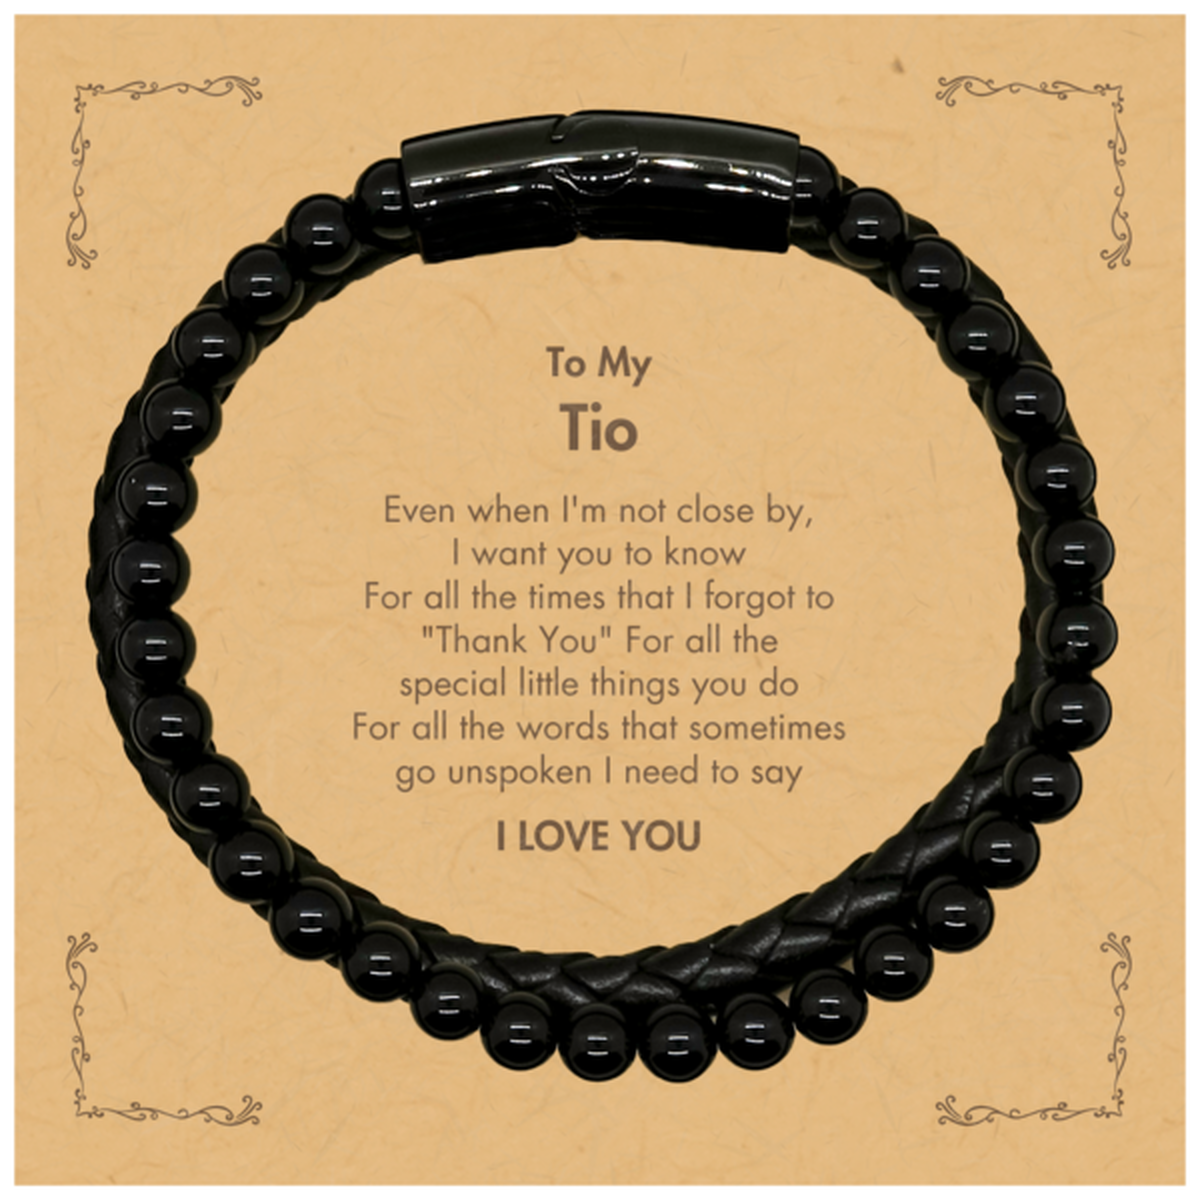 Thank You Gifts for Tio, Keepsake Stone Leather Bracelets Gifts for Tio Birthday Mother's day Father's Day Tio For all the words That sometimes go unspoken I need to say I LOVE YOU